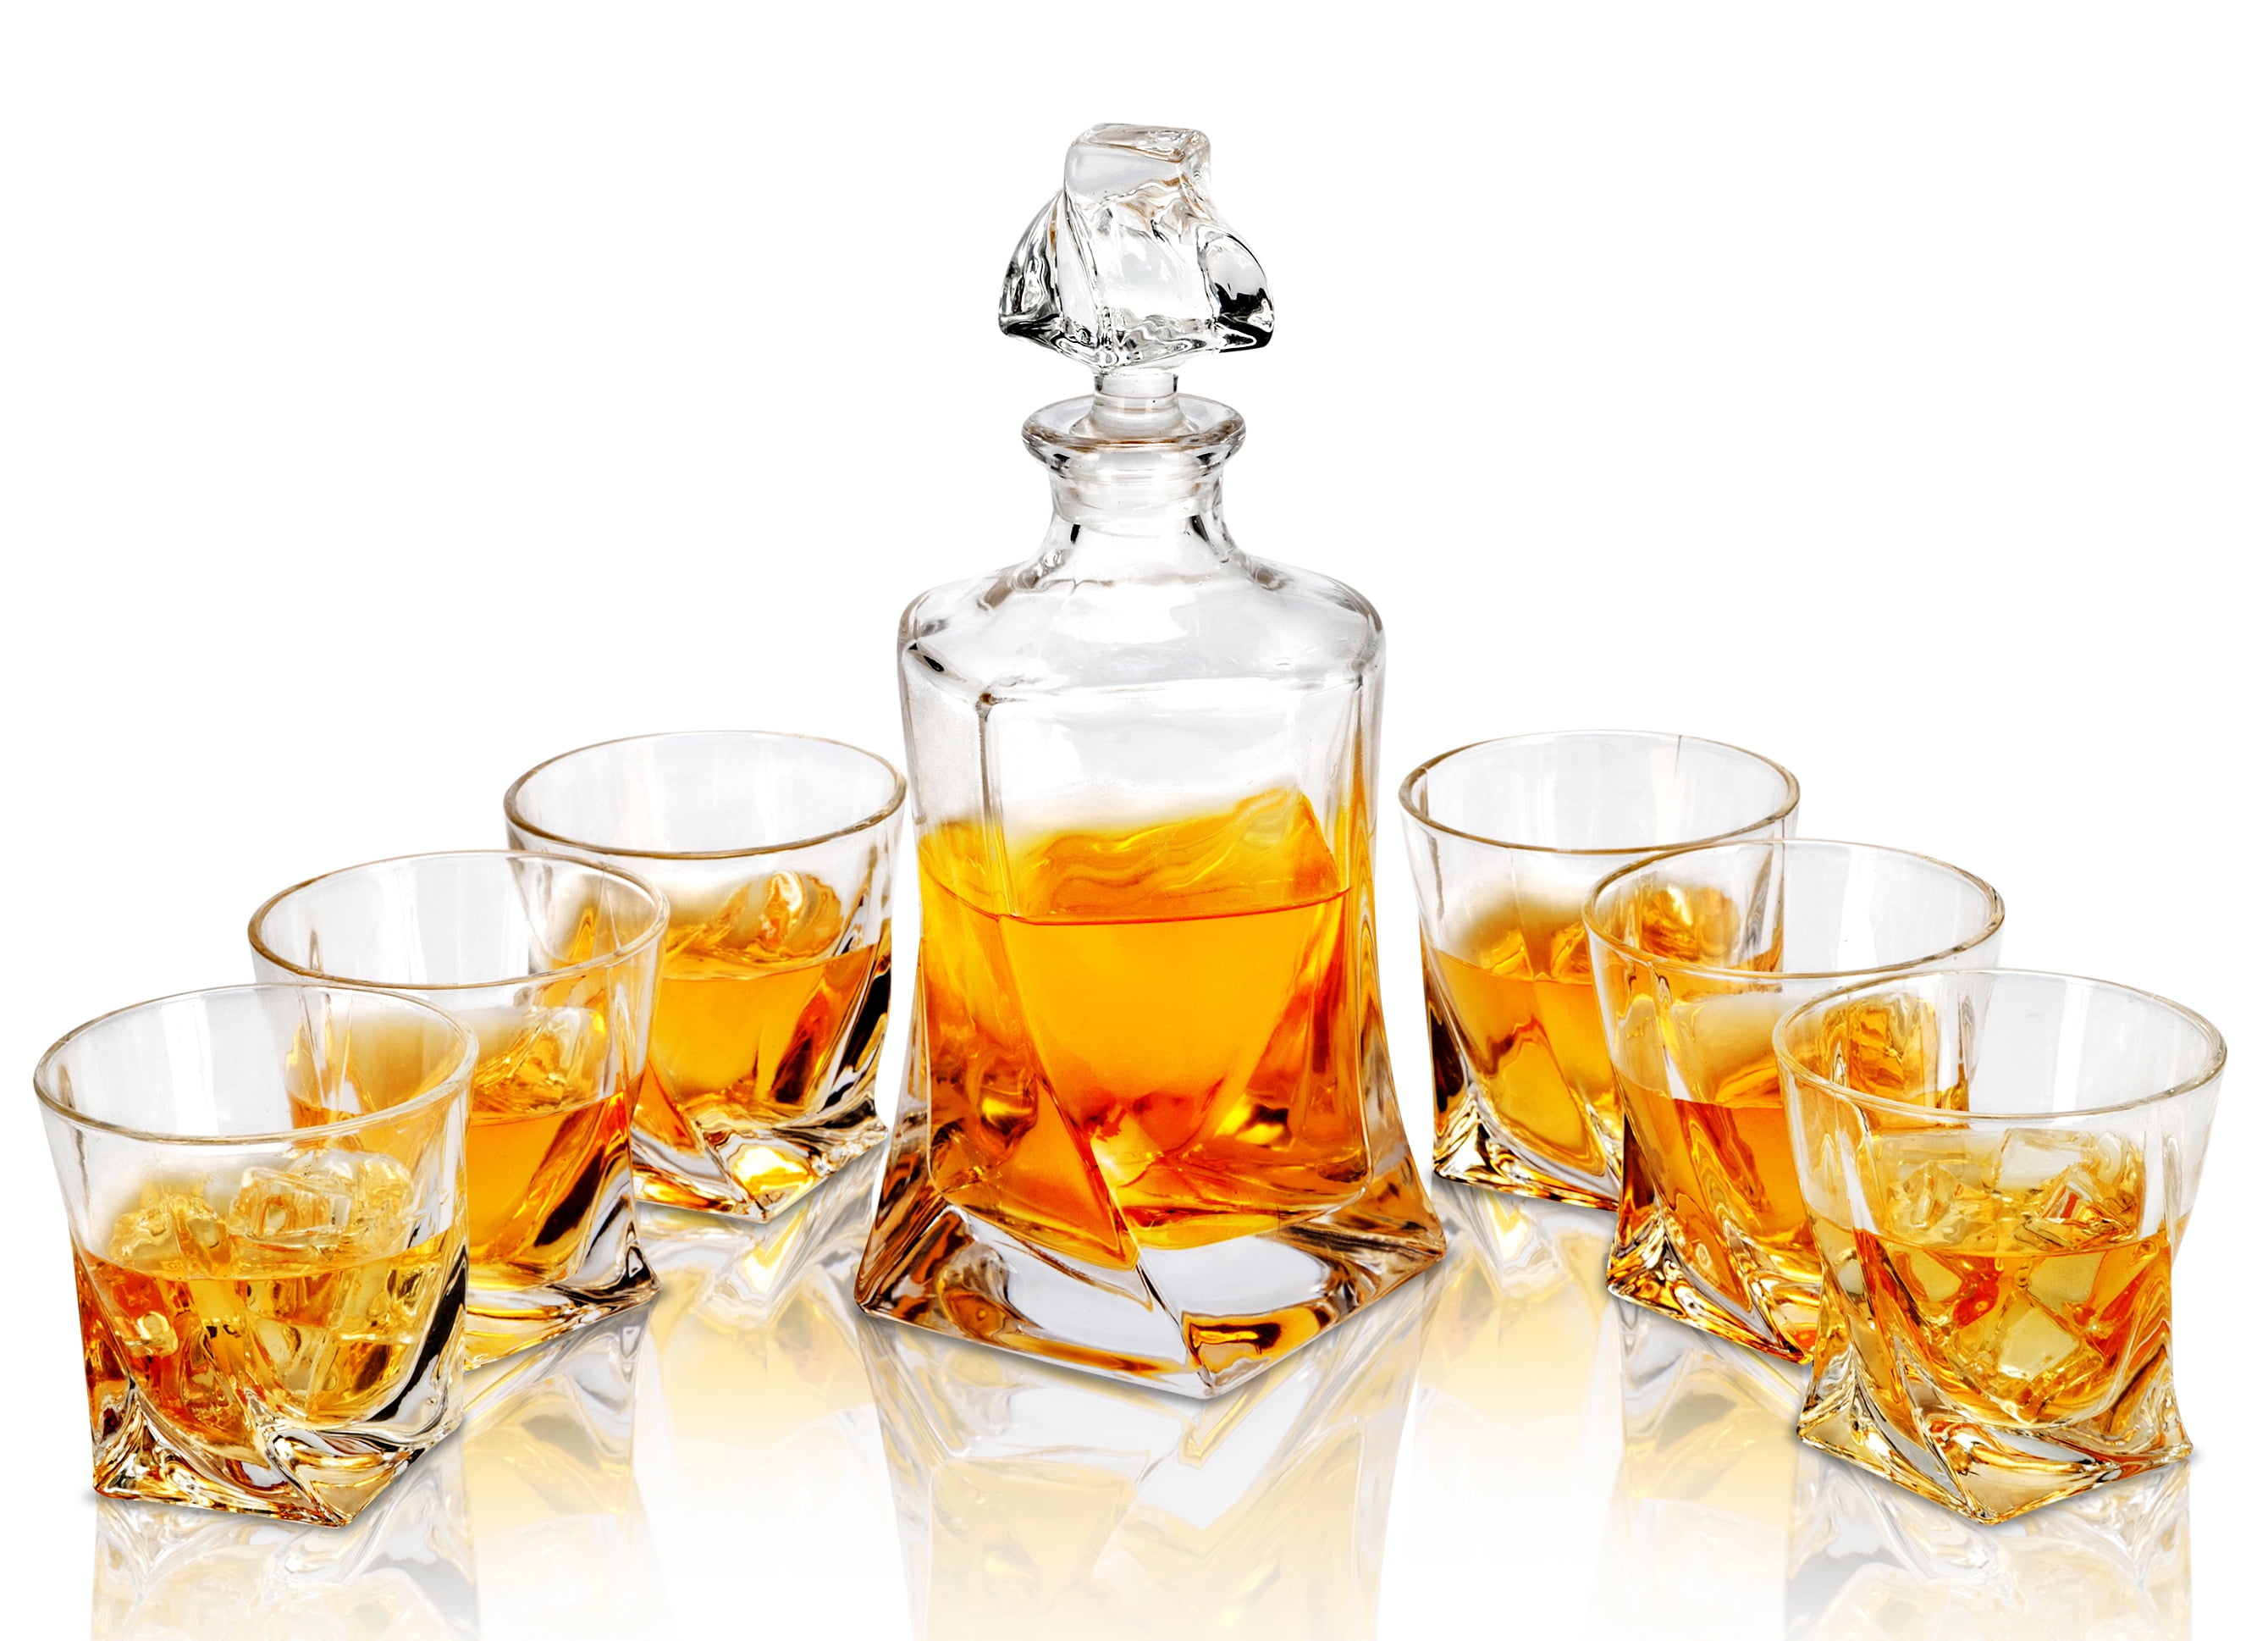 Details about   JoyJolt Atlas Decanter Set of 4 Glasses with Whiskey Decanter IN GIFT BOX 